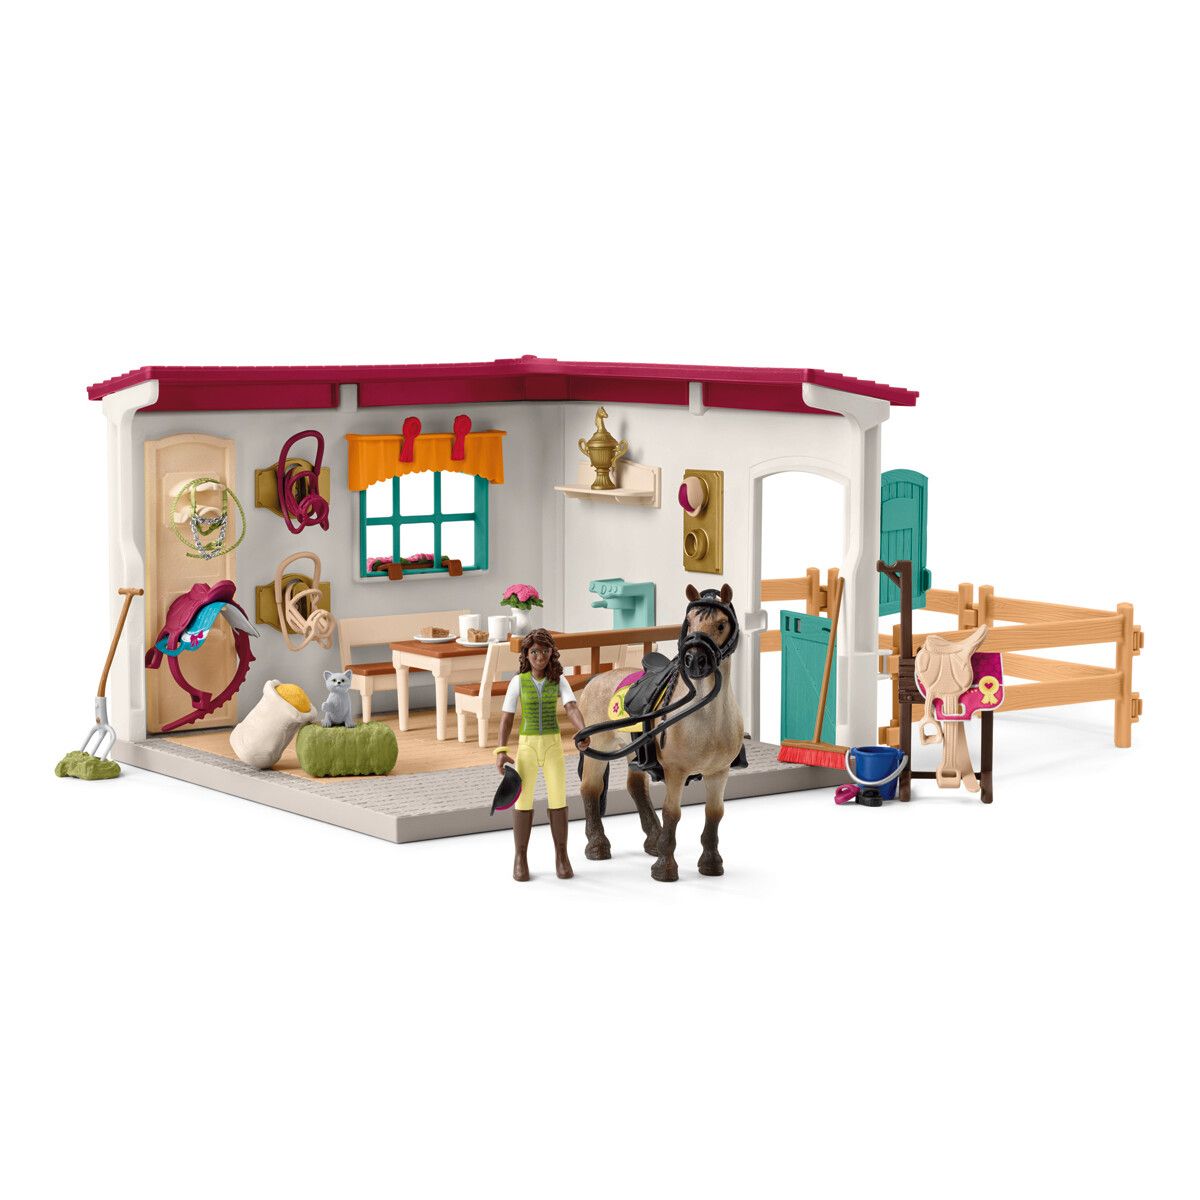 Buy Schleich - Horse Club - Tack Room Extension (42591) - Free